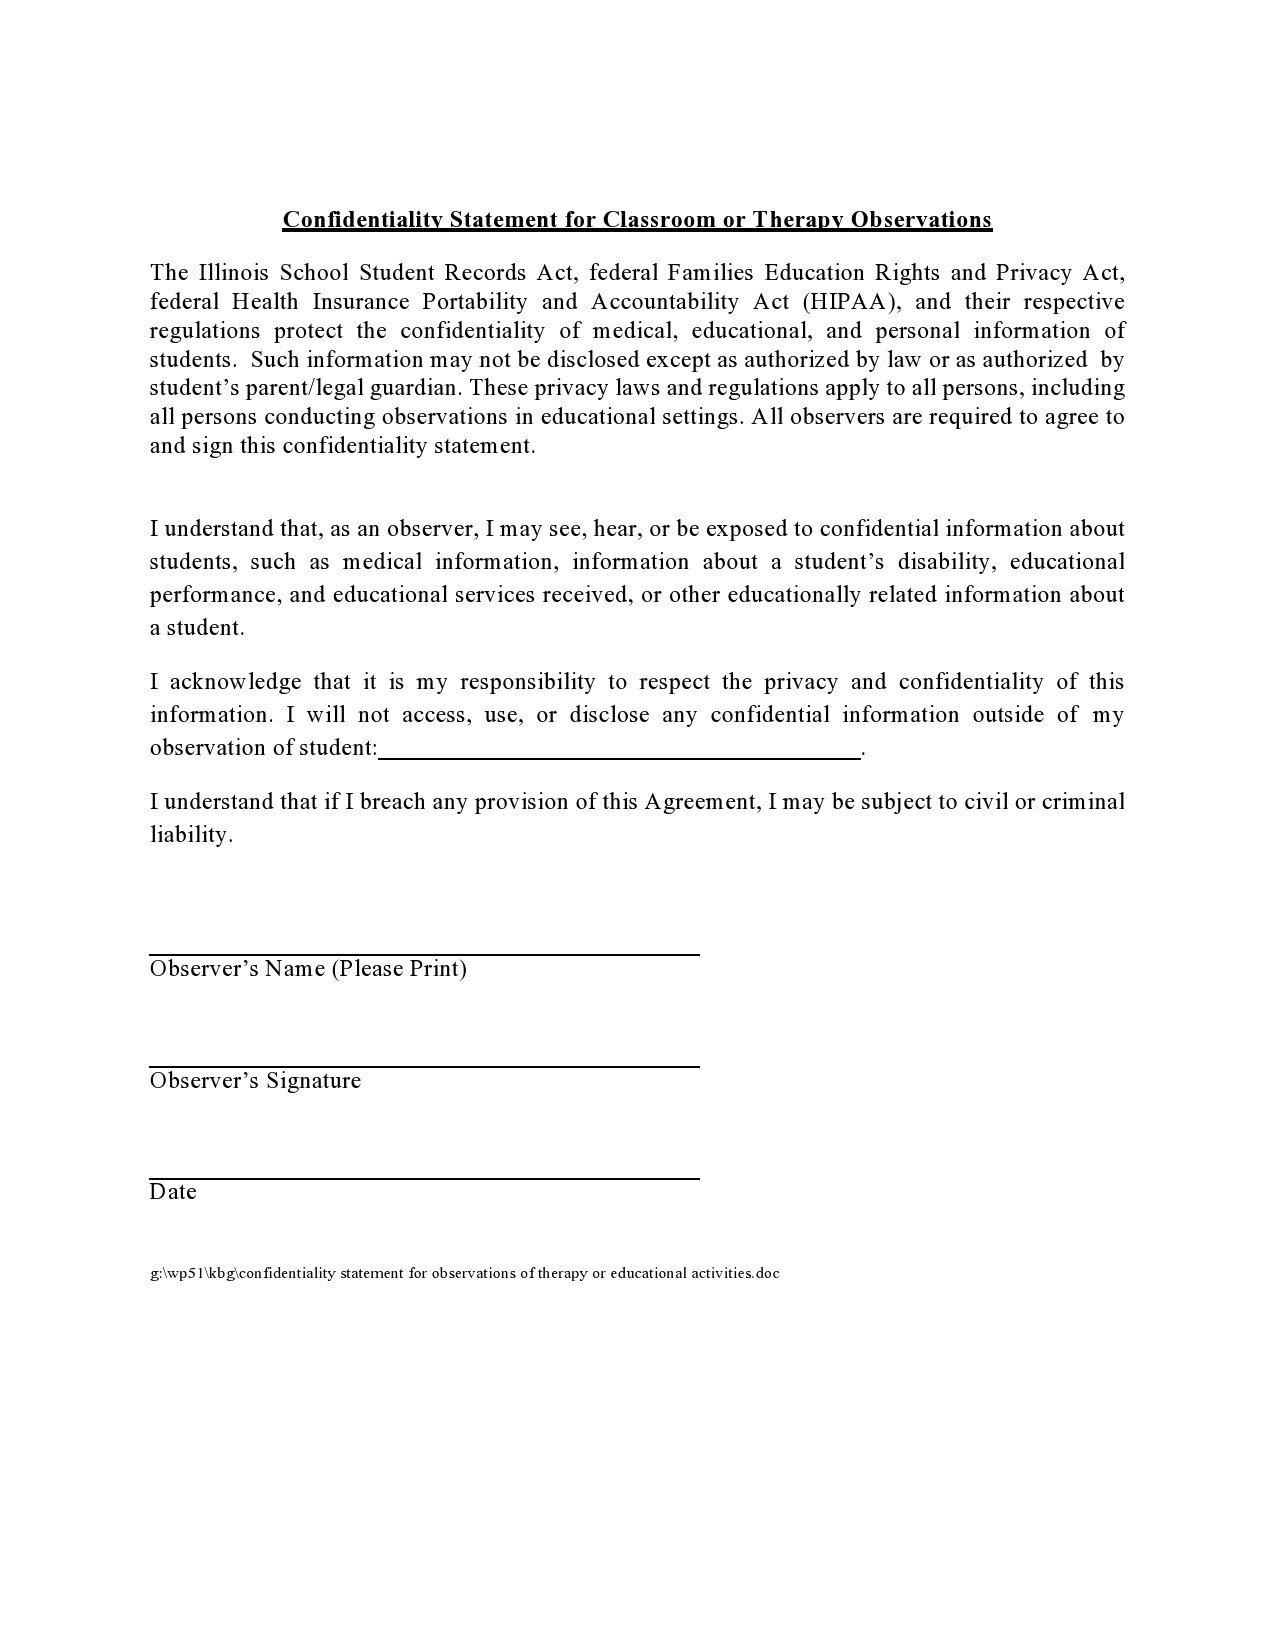 confidentiality statement template 20